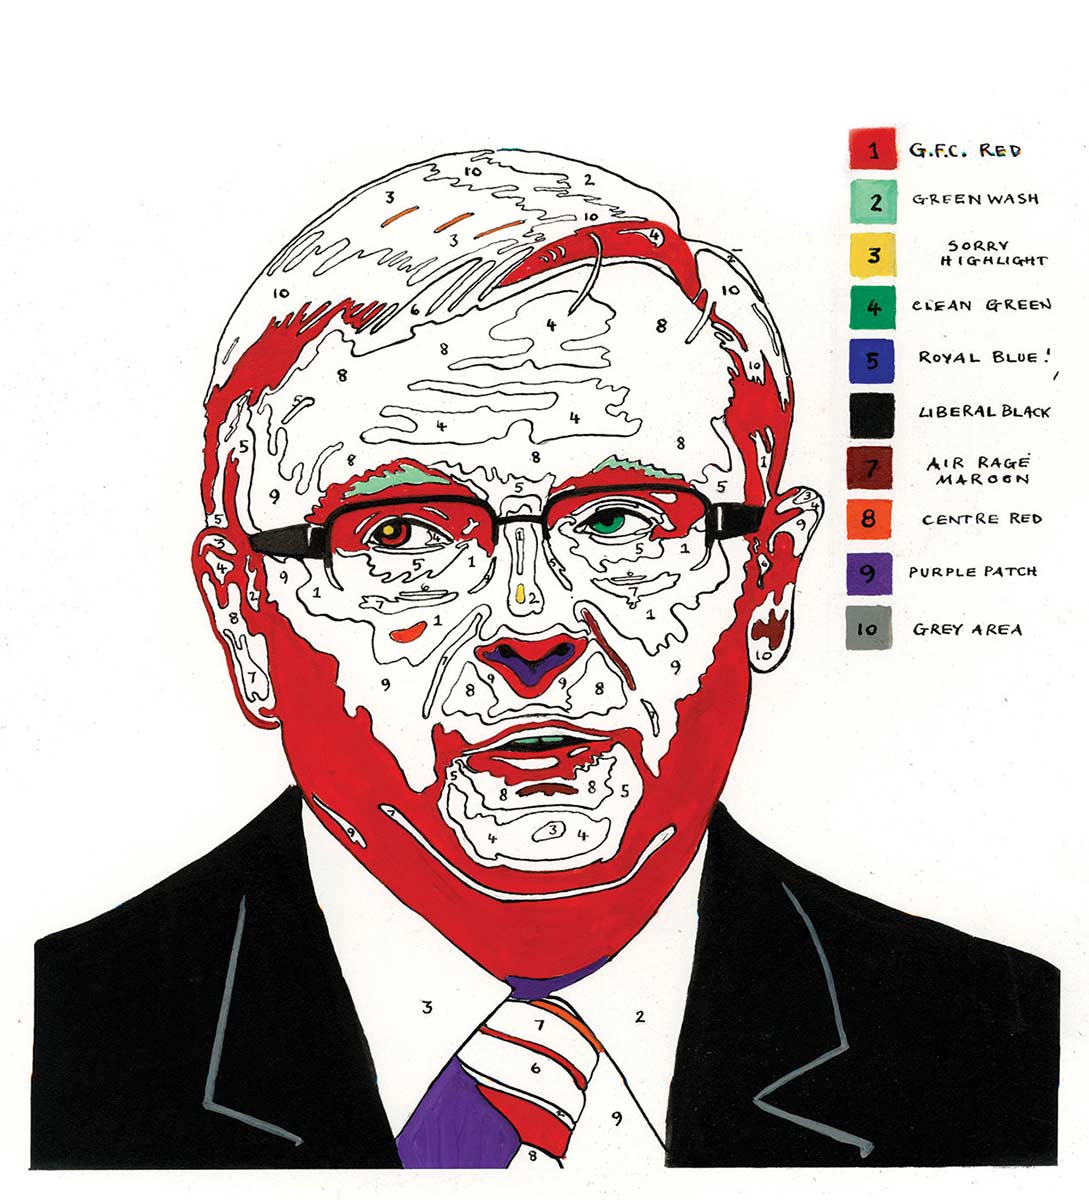 A 'paint by numbers' colour image of Kevin Rudd. There are large areas of red on his face and hair. Some small areas of green, purple and yellow are visible. His jacket and glasses are black. To the right of his head are 10 colour squares arranged in a column. Each square is numbered. To the right of the squares are written colour descriptions. These are, from top to bottom: G.F.C. Red, Green Wash, Sorry Highlight, Clean Green, Royal Blue, Liberal Black, Air Rage Maroon, Centre Red, Purple Patch and Grey Area. - click to view larger image